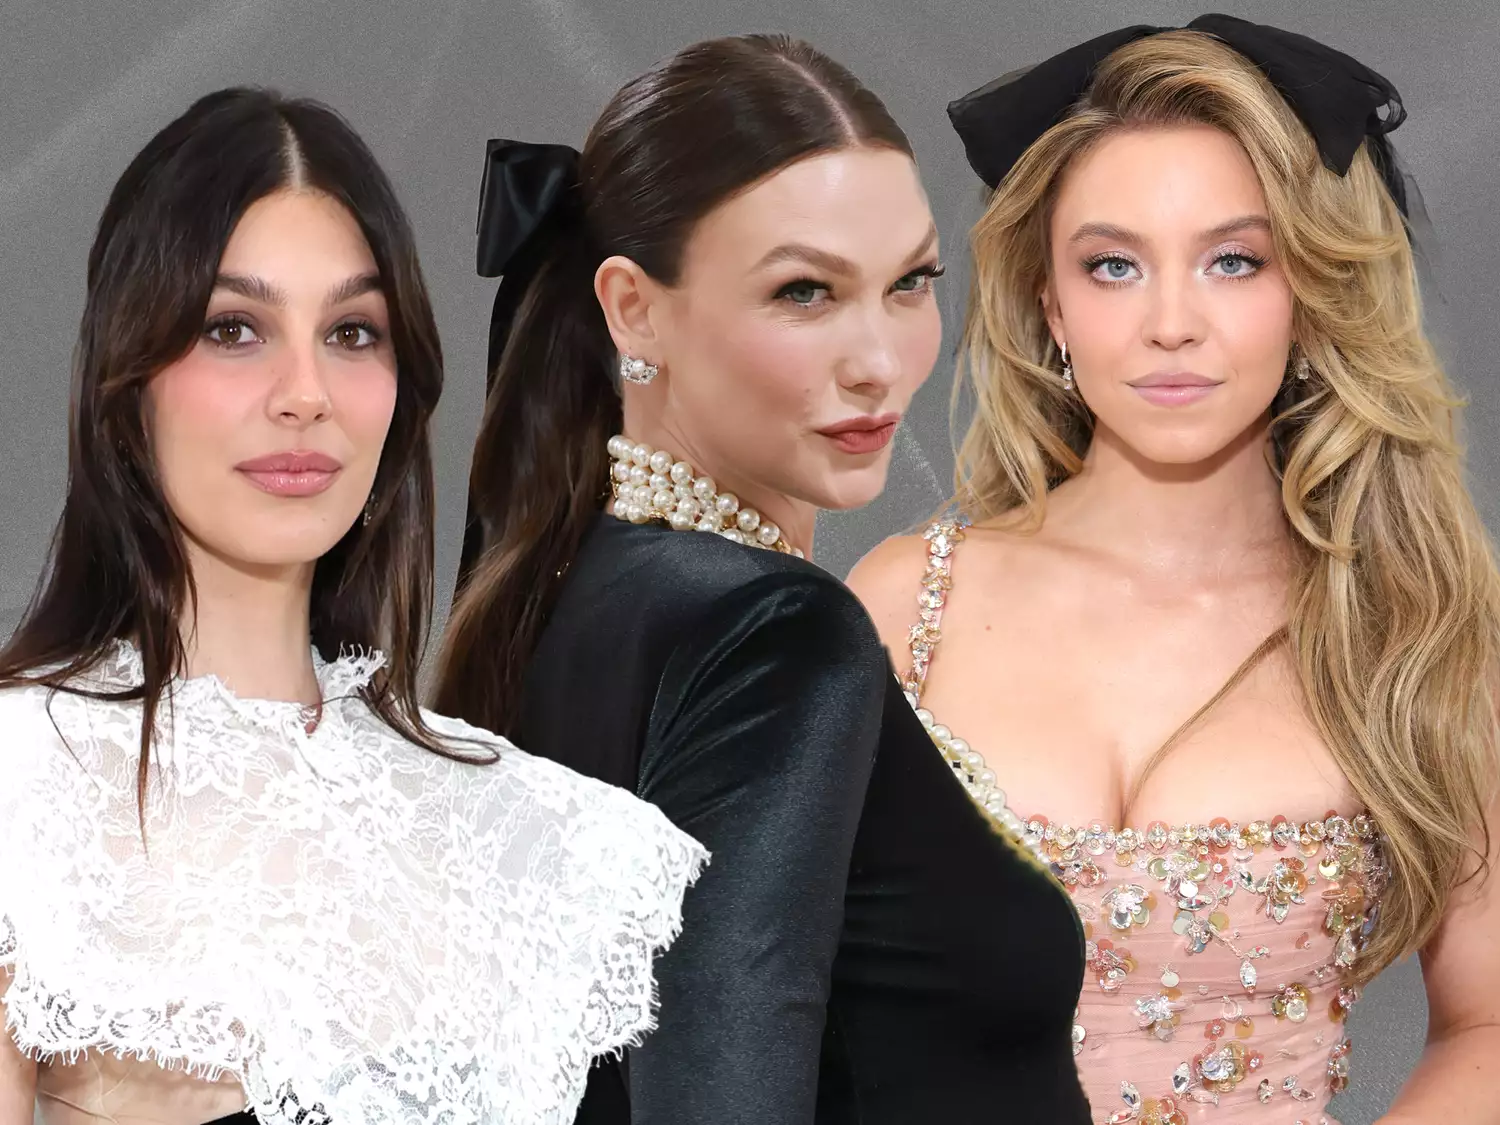 Camila Marrone, Karlie Kloss, and Sydney Sweeney wearing hair accessories at the 2023 Met Gala